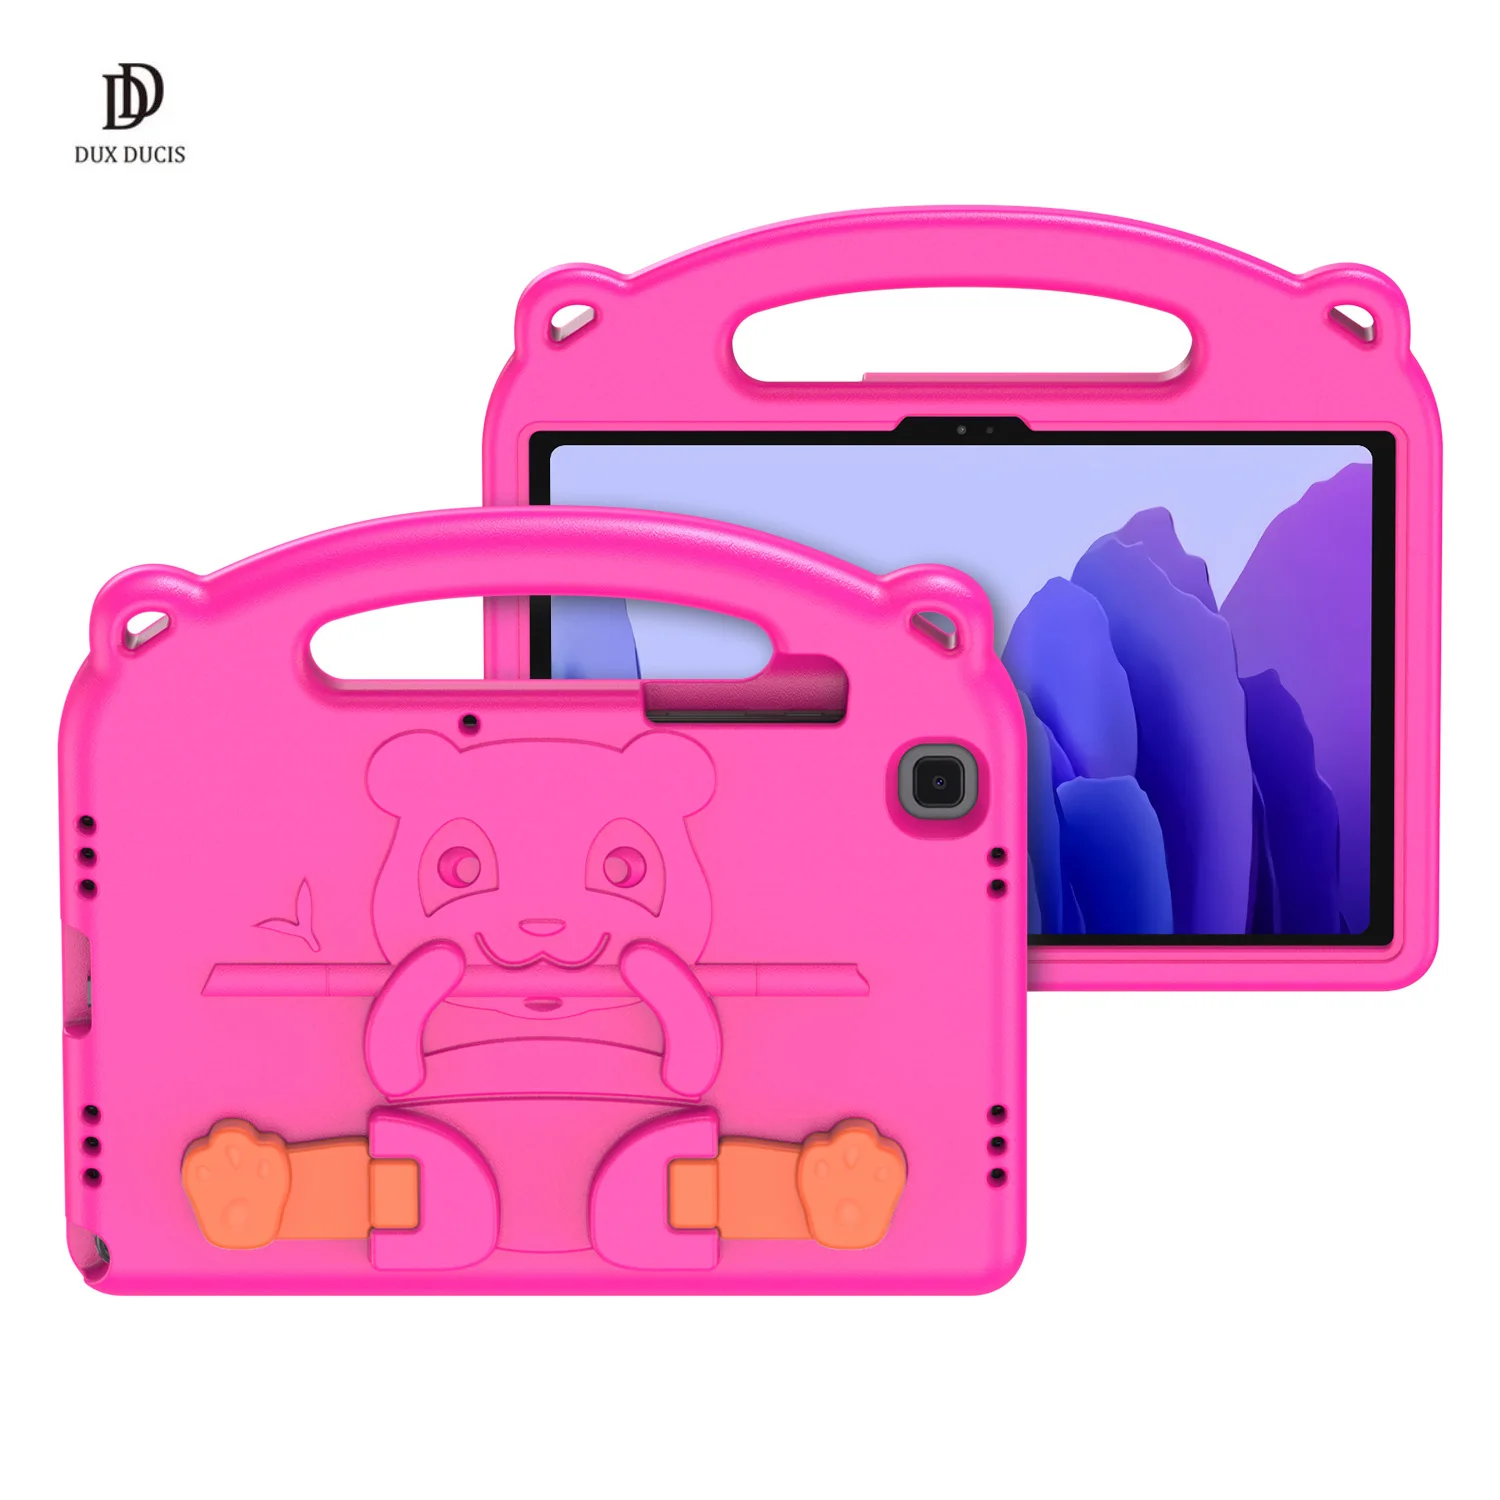 

Newest Kids Case For Samsung Galaxy Tab A7 2020 Case DUX DUCIS Panda Funda with Stand Cover for T500/T505 Protecting Case